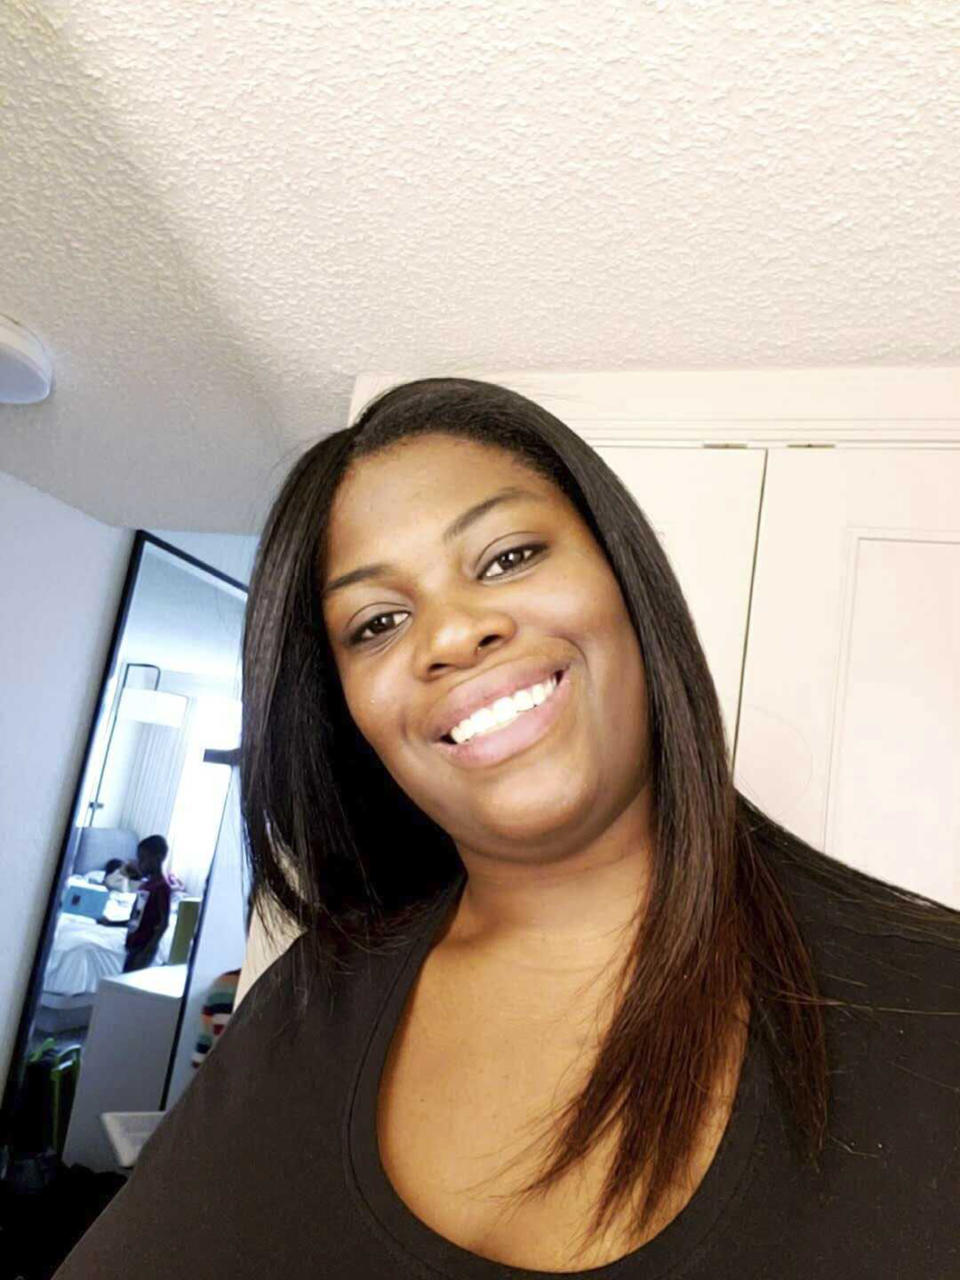 This Jan. 14, 2023, photo released by attorney Anthony D. Thomas, shows Owens, a 35-year-old mother of four from Ocala, Fla. The Marion County sheriff said Owens was shot and killed Friday, June 2, 2023, moments after going to the apartment of her neighbor, who had yelled at Owens' children as they played in a nearby lot. (Anthony D. Thomas via AP)